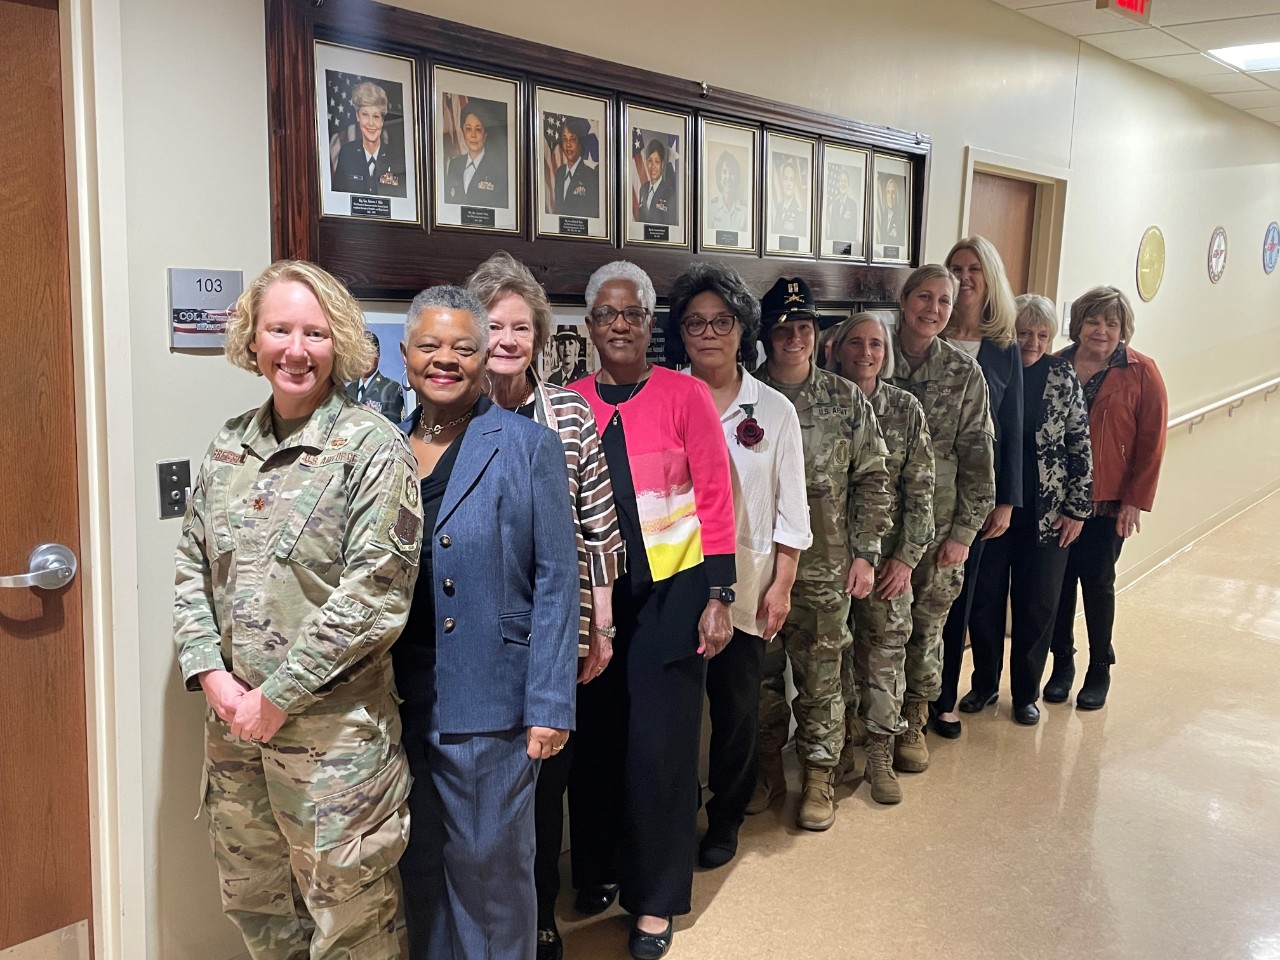 Current and former members of the Tennessee National Guard, who are featured on the new Women’s History Wall, pose in front of the memorial, March 28, following a ribbon-cutting ceremony that took place at Nashville’s Joint Force Headquarters. The wall features 23 women who were the first in their respective positions, such as first female Blackhawk pilot, and first female general officer of the Tennessee National Guard. (photo by Capt. Kealy Moriarty)